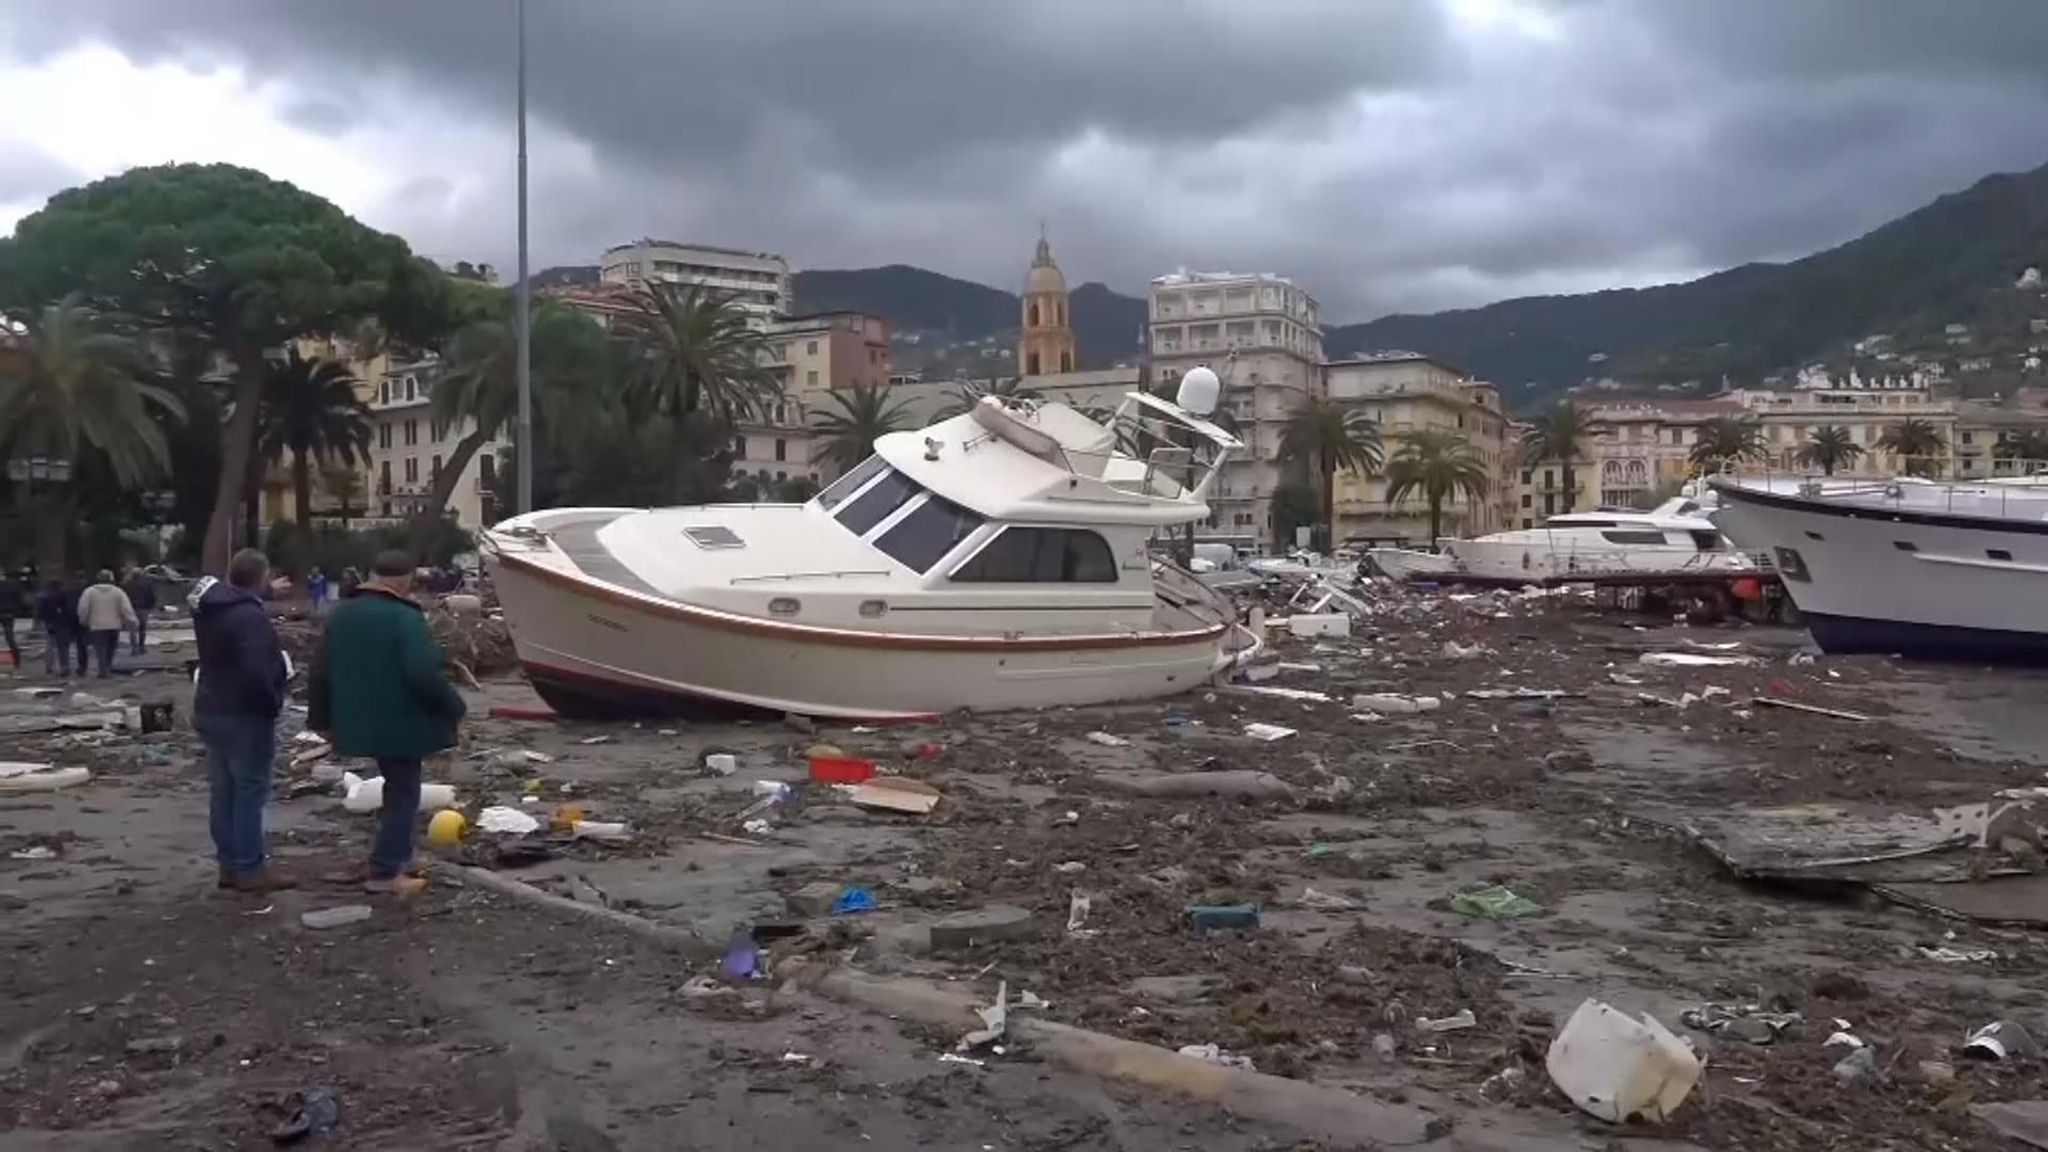 Italy severe weather 11 die after fierce winds and heavy rain batter